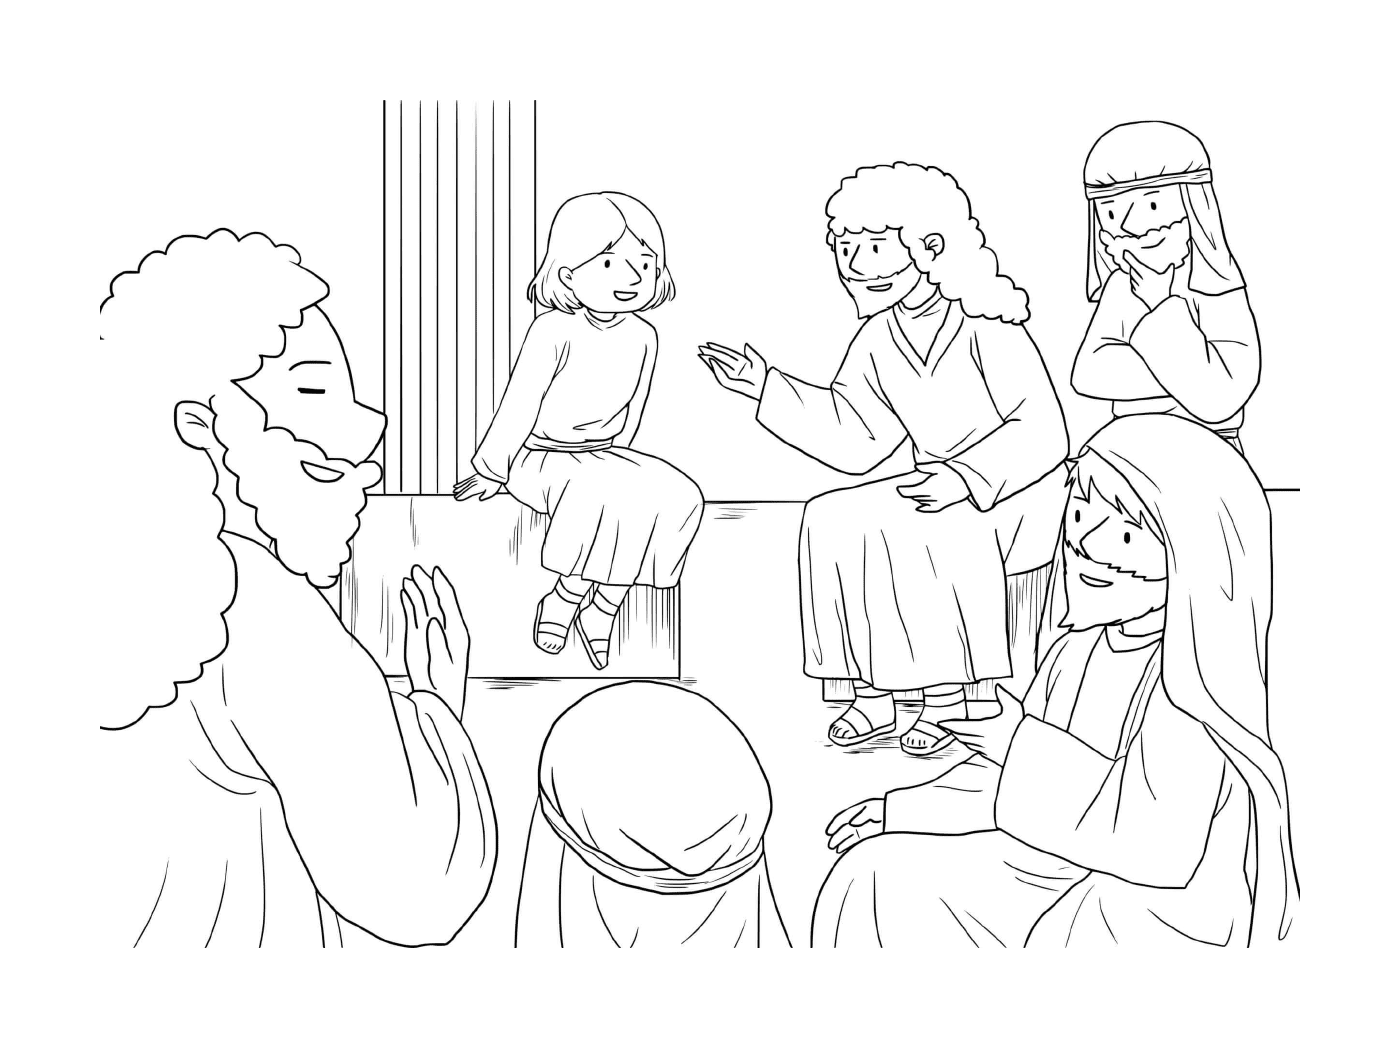  Group of people gathered around a woman 